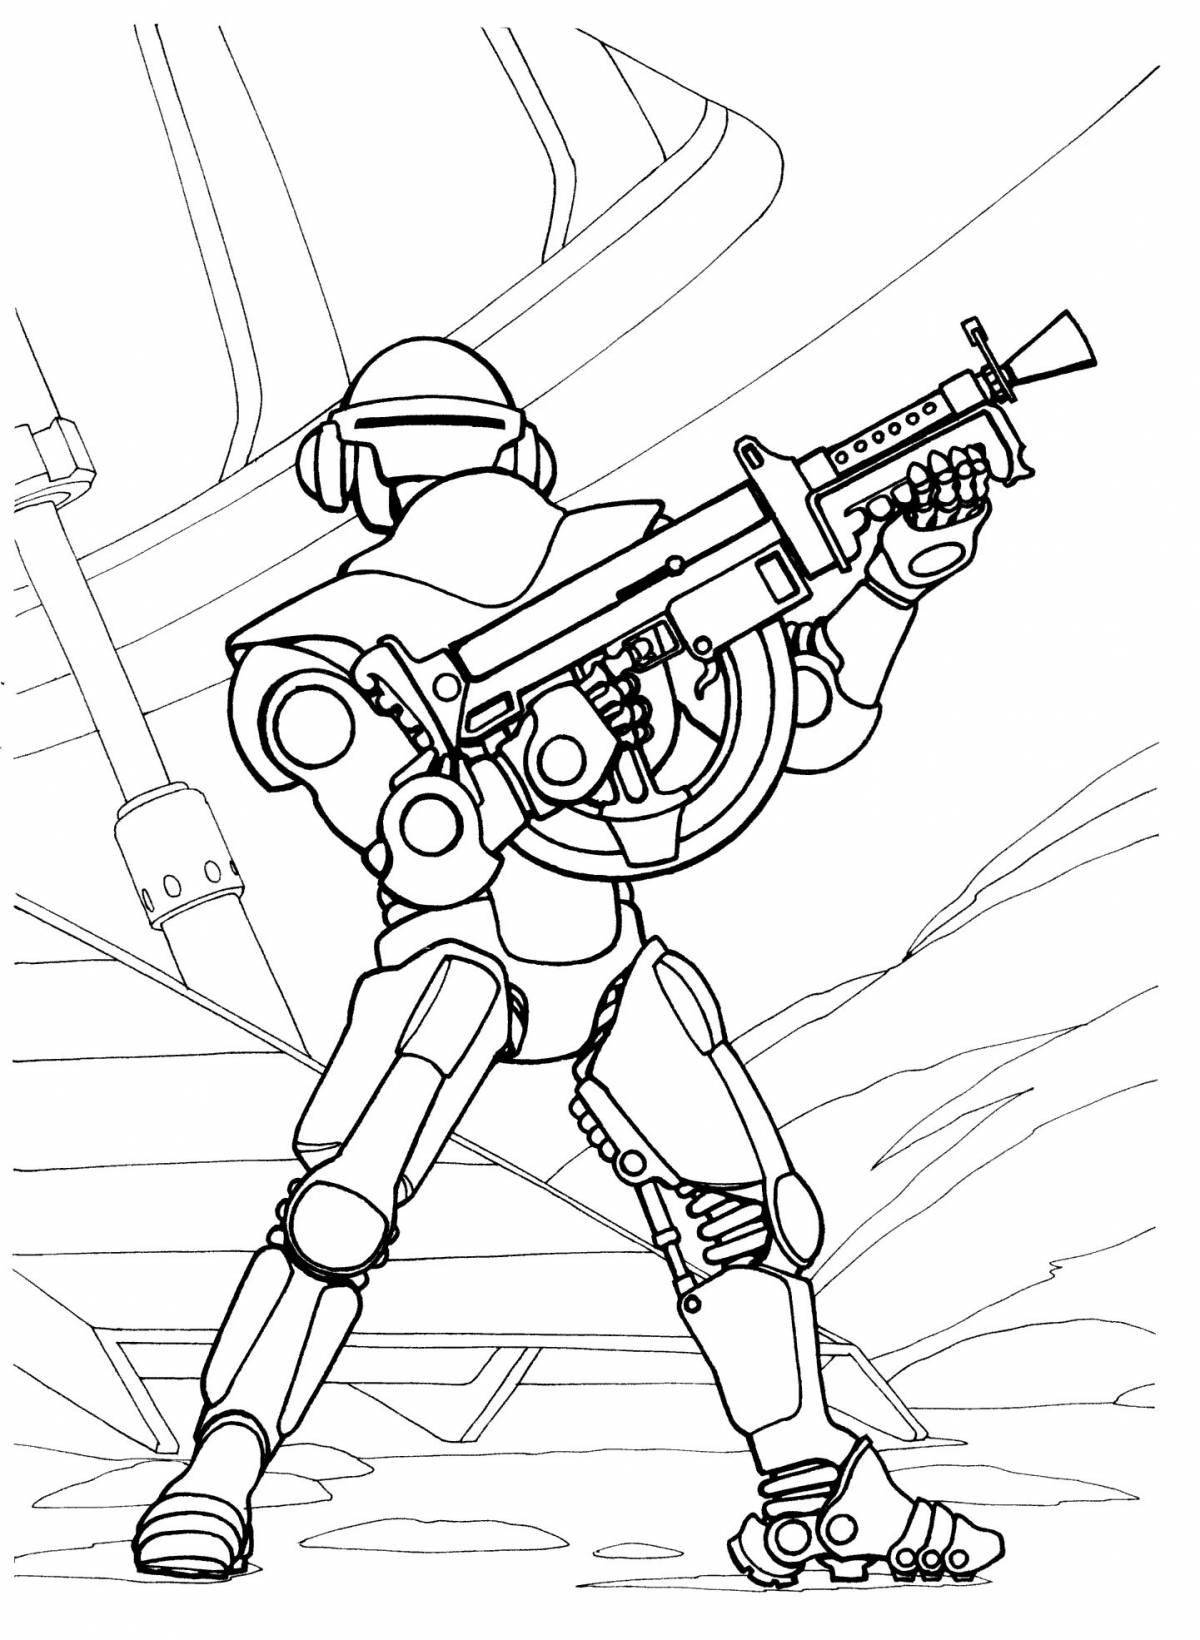 Fun cool robot coloring page for boys